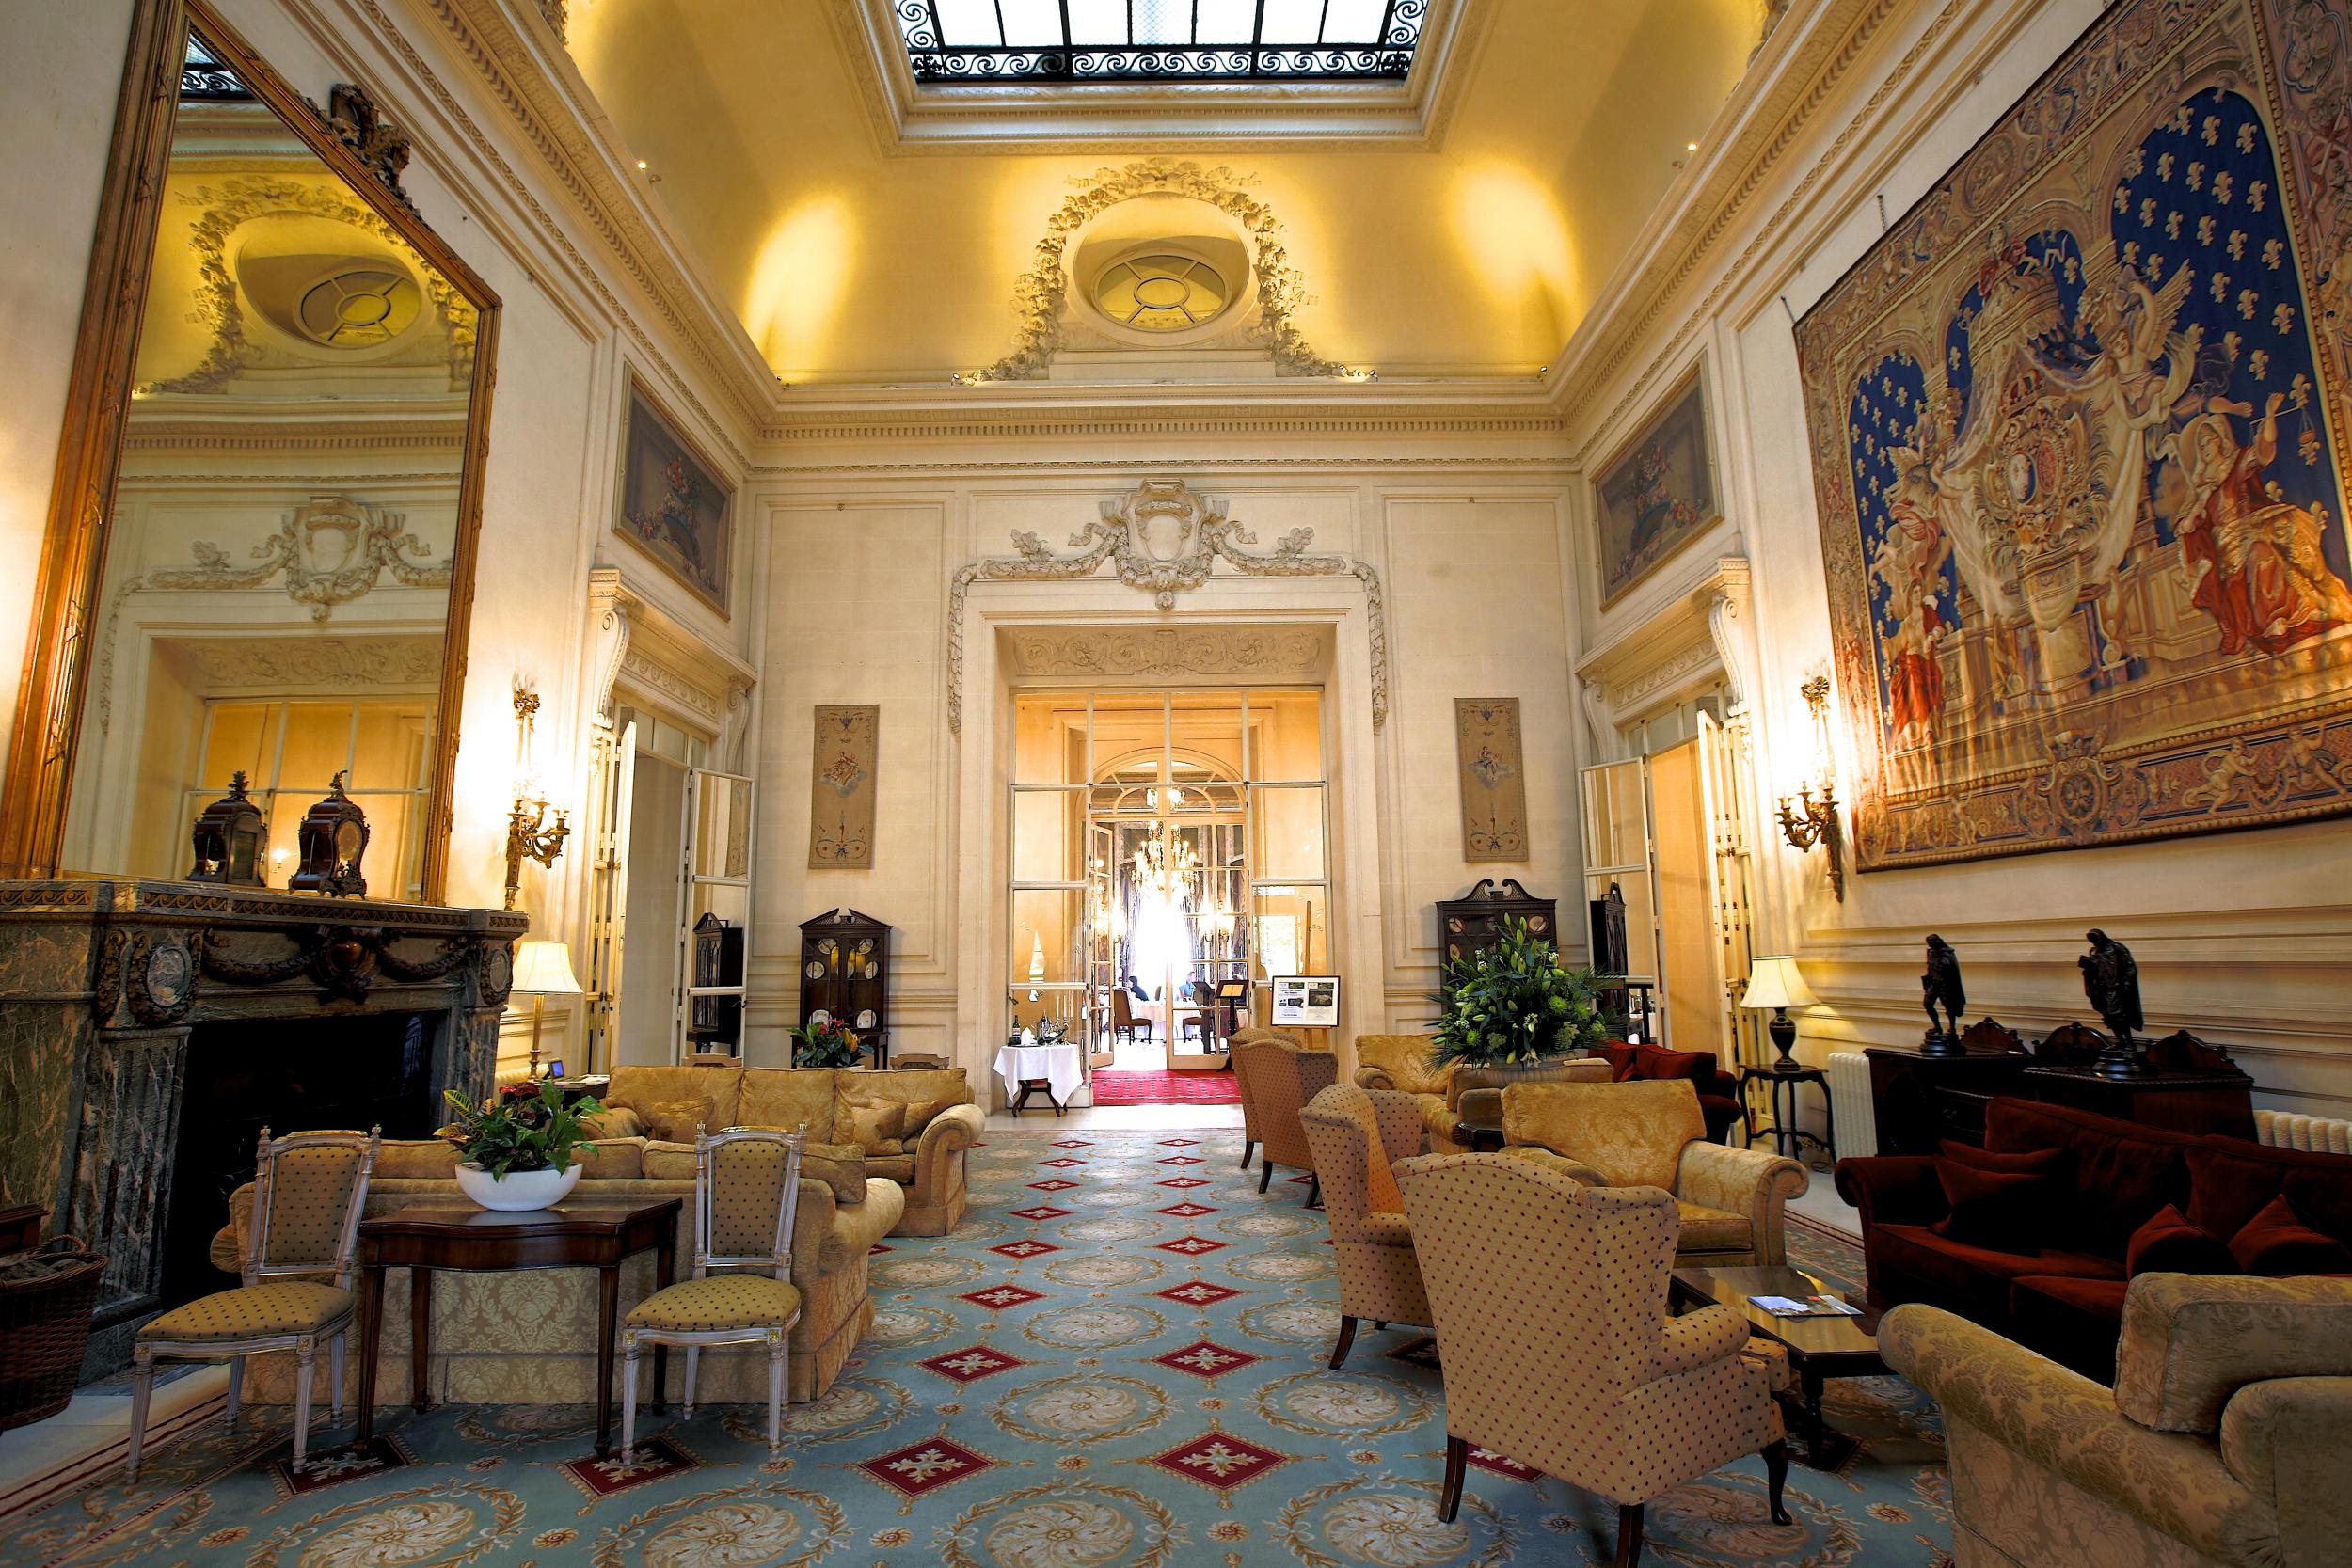 Luton Hoo isn’t your usual airport hotel